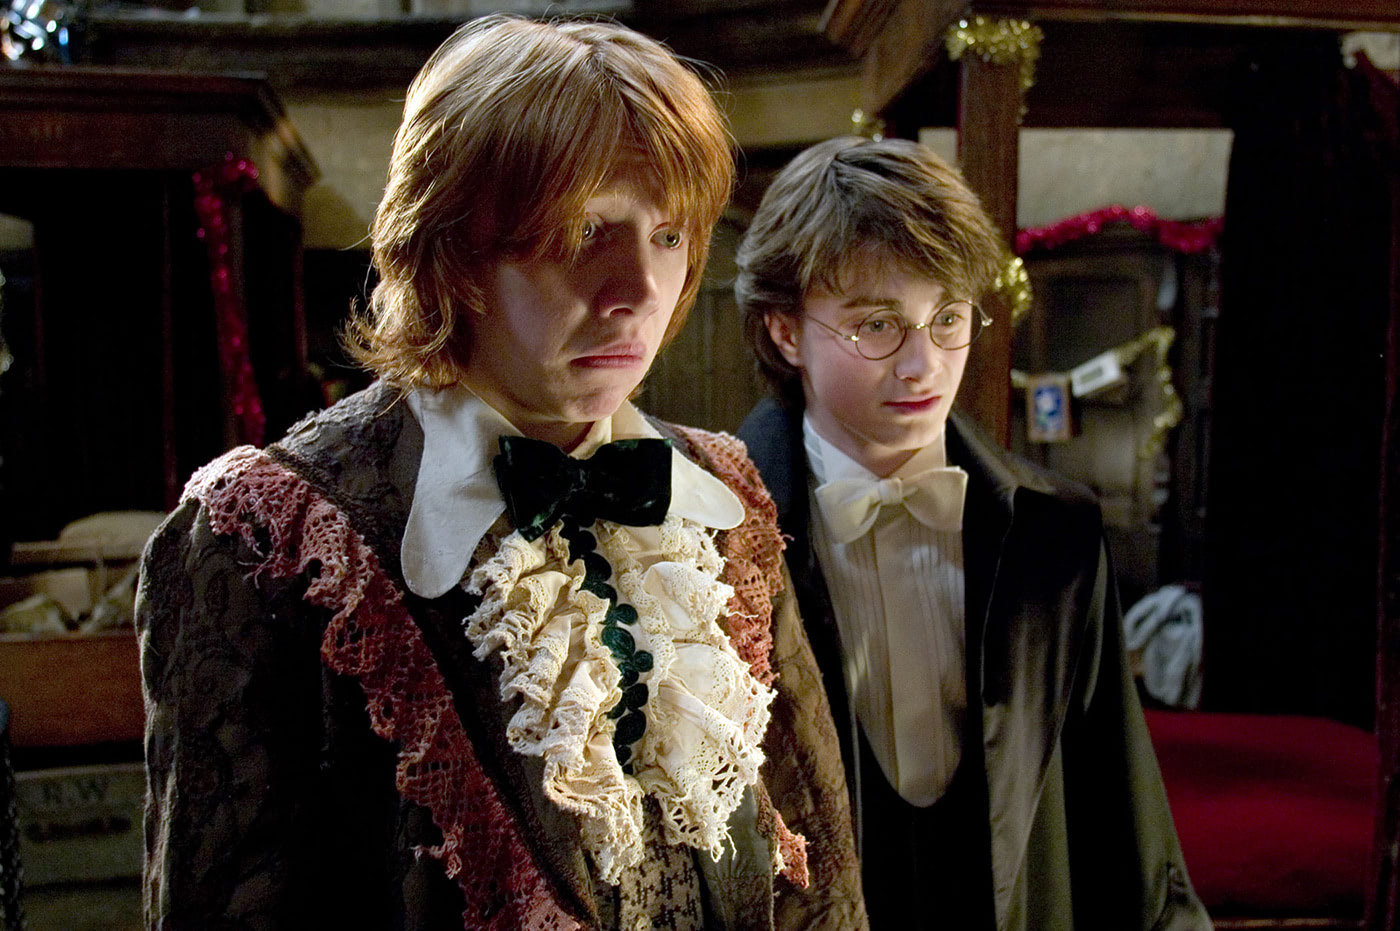 Harry and Ron preparing for the Yule Ball